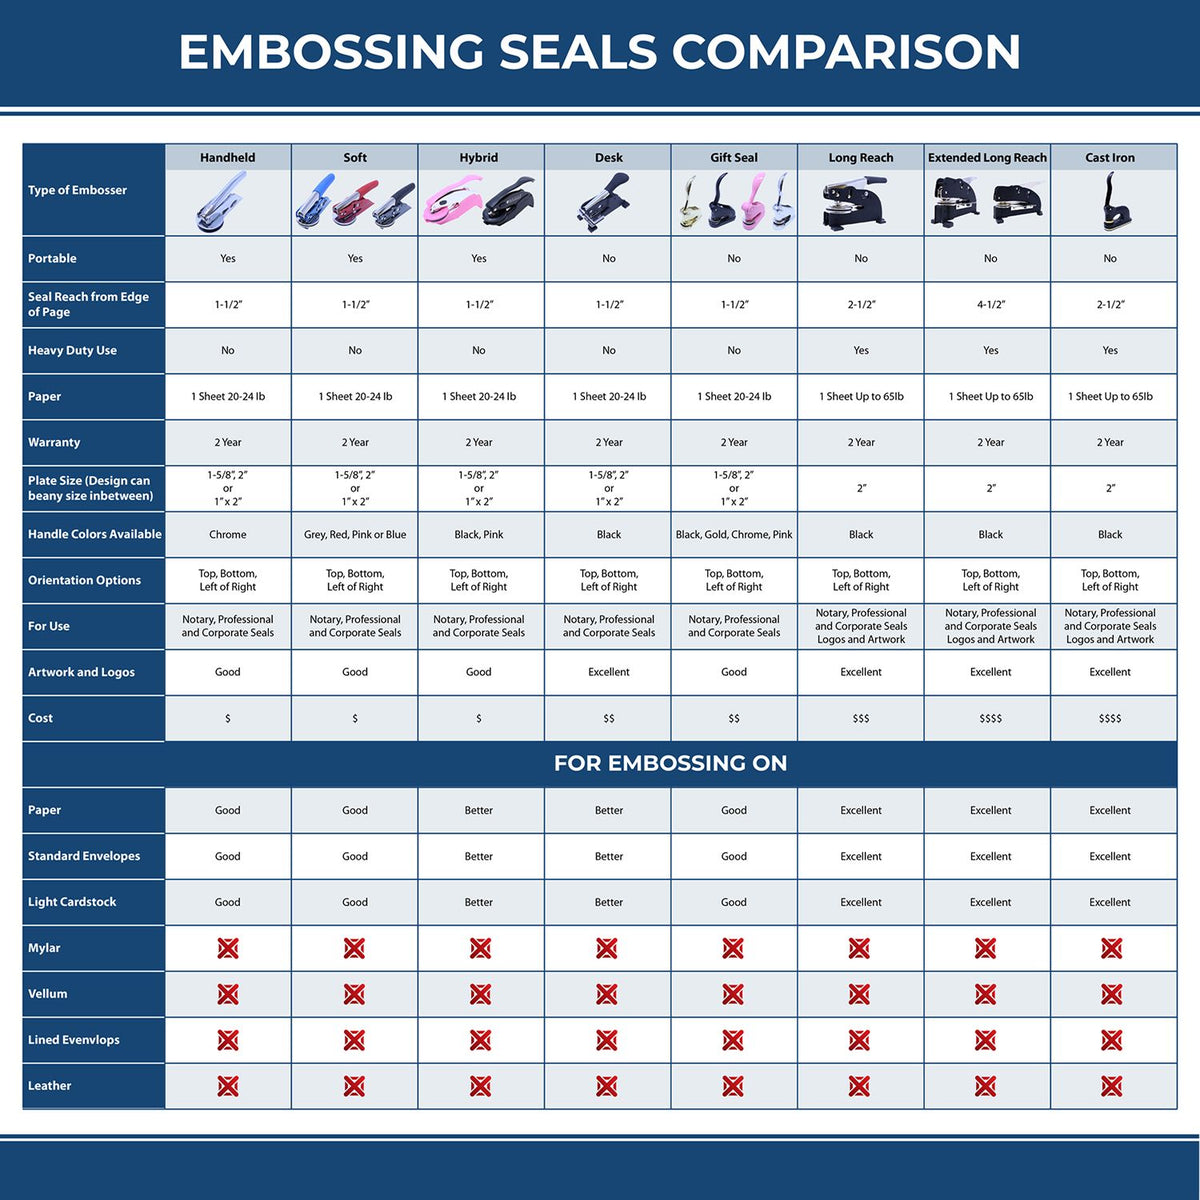 A comparison chart for the different types of mount models available for the Handheld Indiana Land Surveyor Seal.